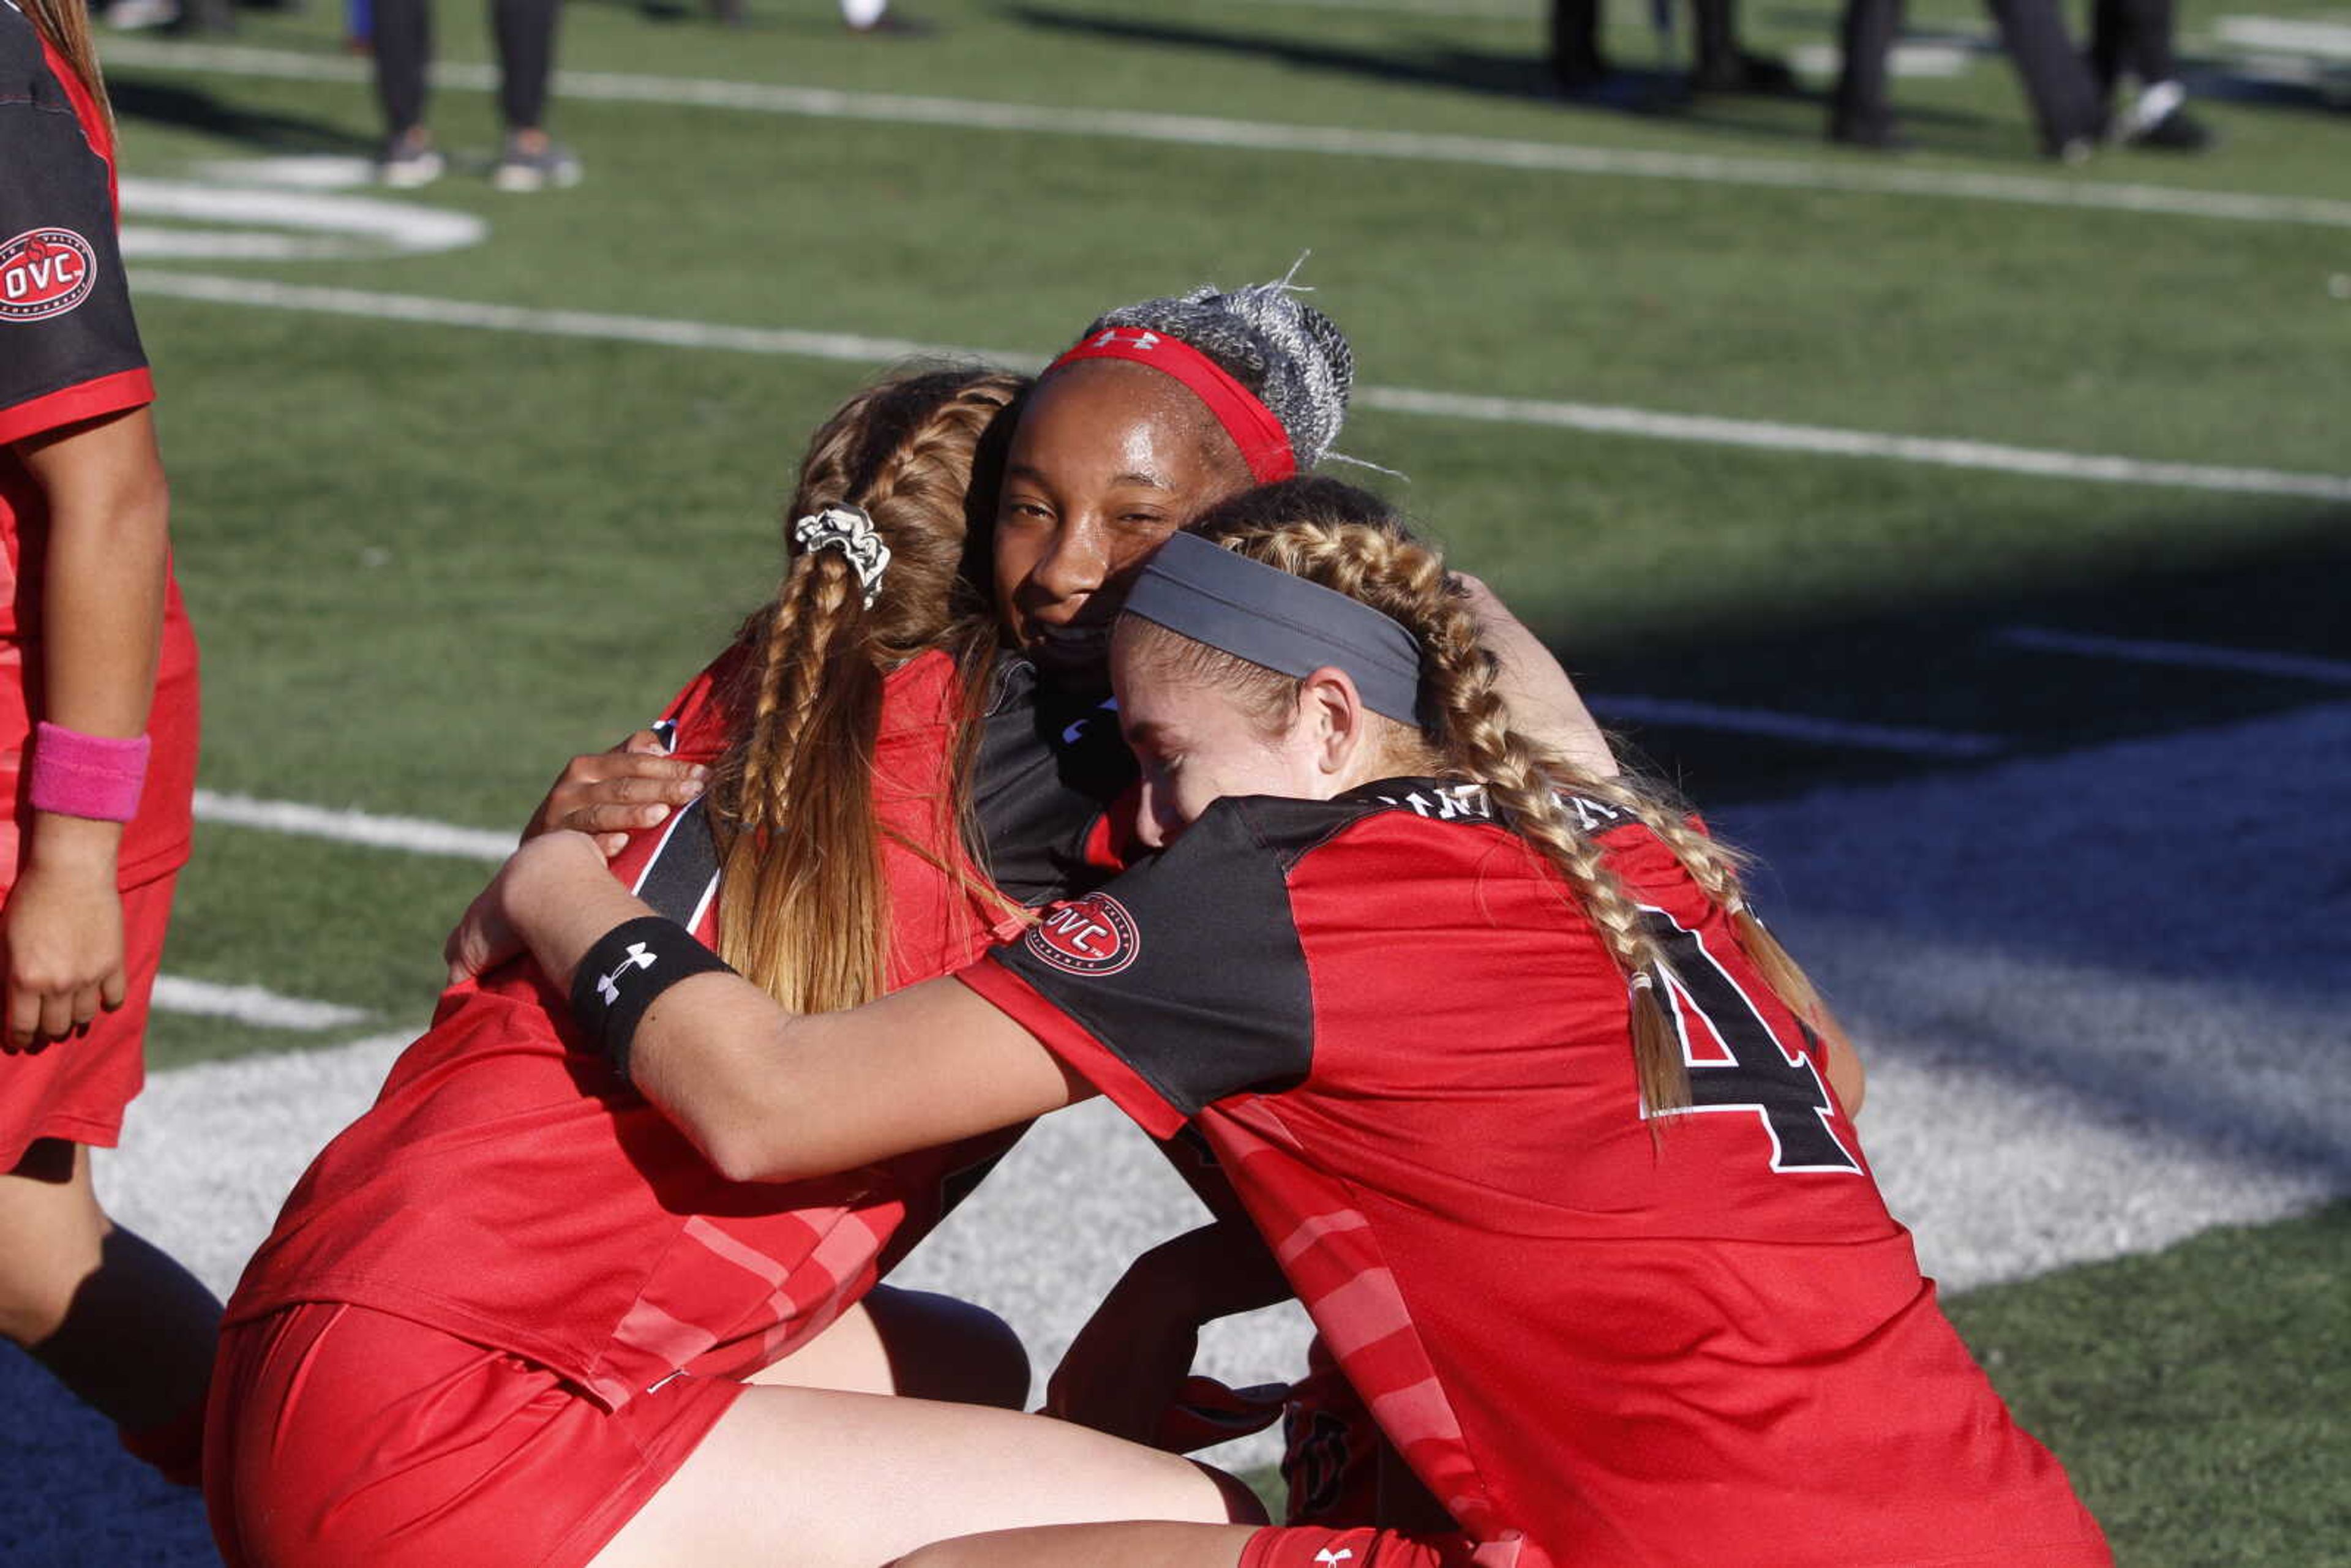 Senior Jermima Job (center) embraces teammates Hannah Compernolle (right) and Katie Wegmann after Southeast's win over Austin Peay on Oct. 21.